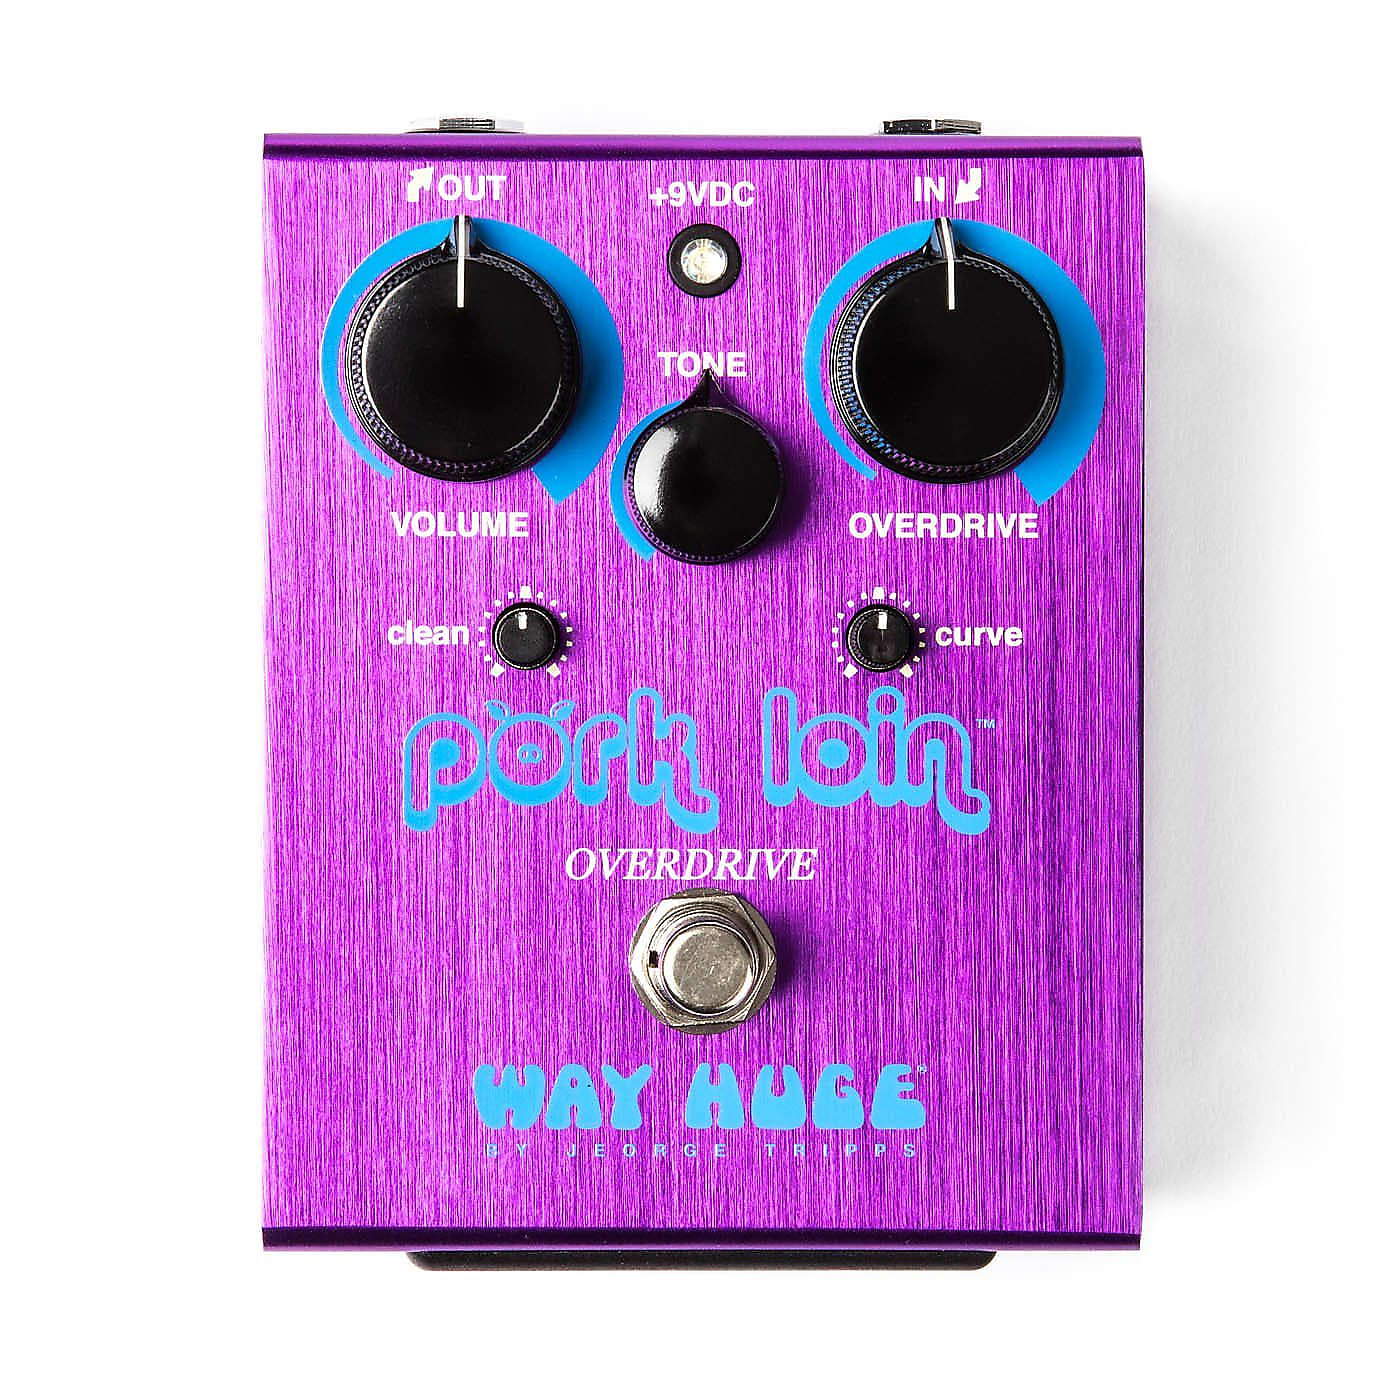 Way Huge WHE201 Pork Loin Soft Clip Injection Overdrive | Reverb